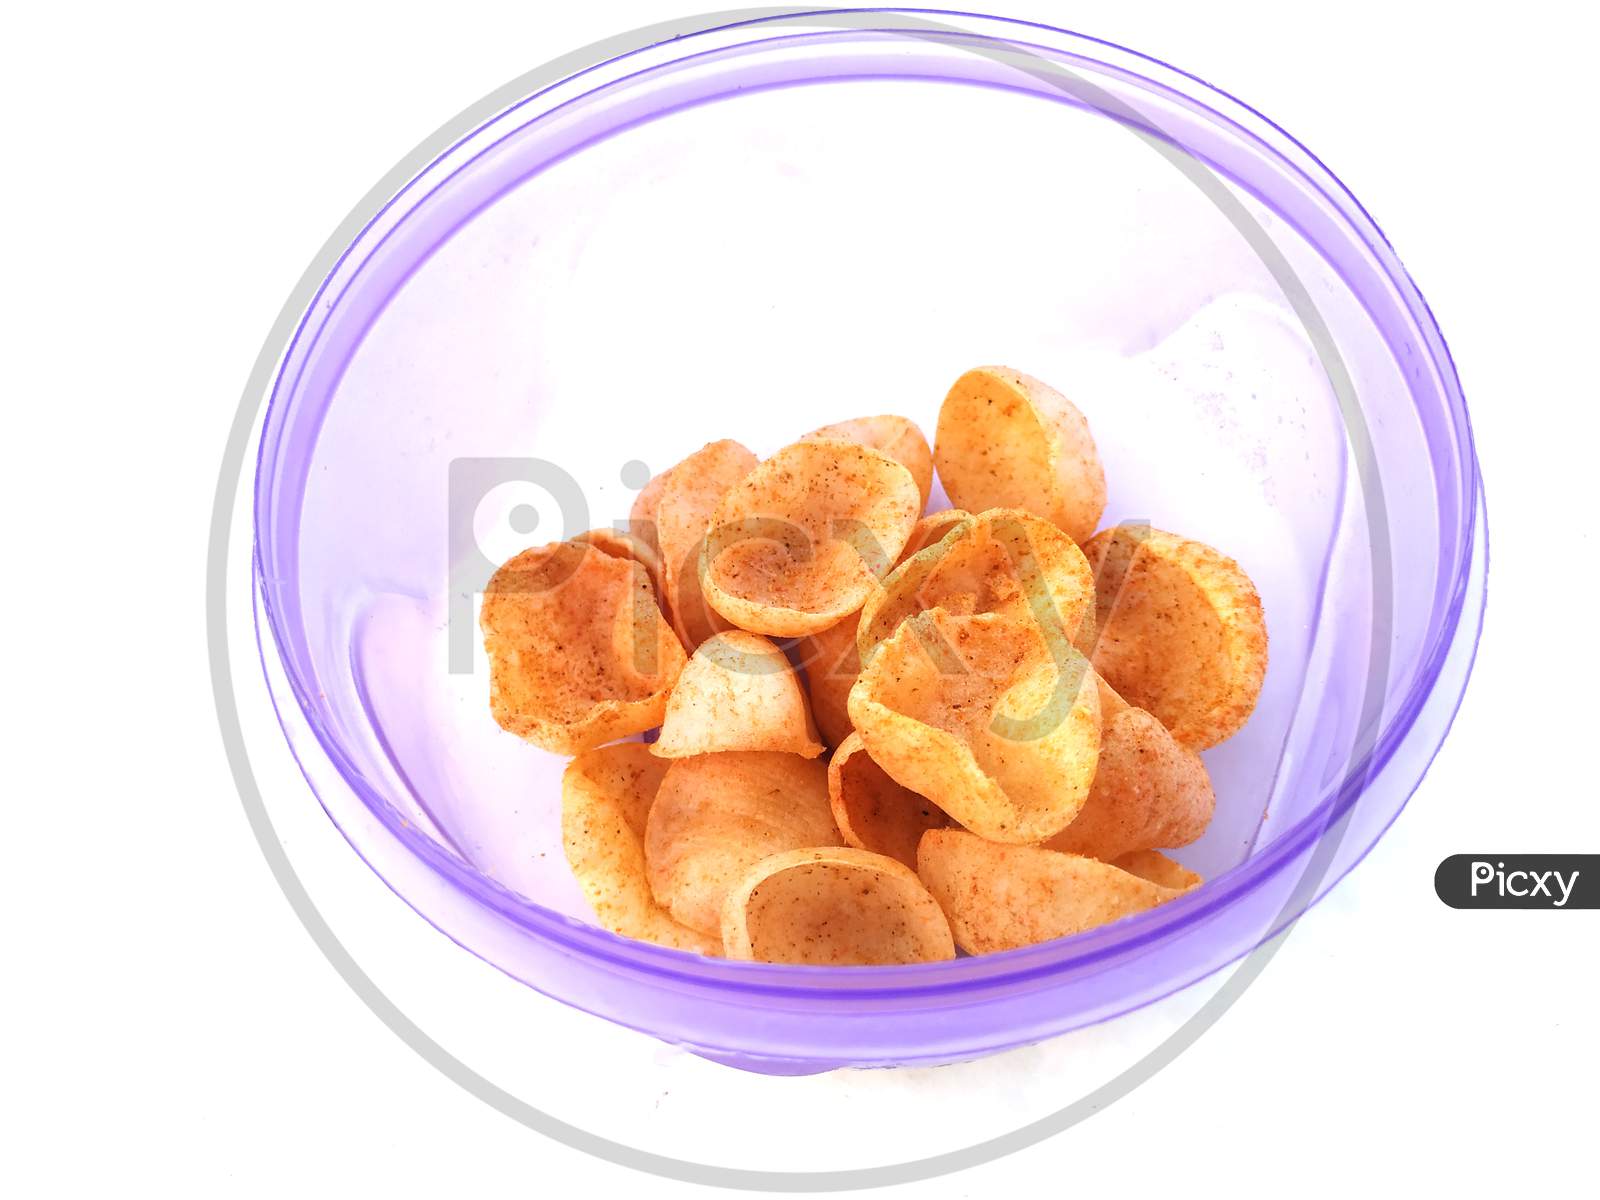 some yellow eatable food put in blue plastic bowl isolated on white background